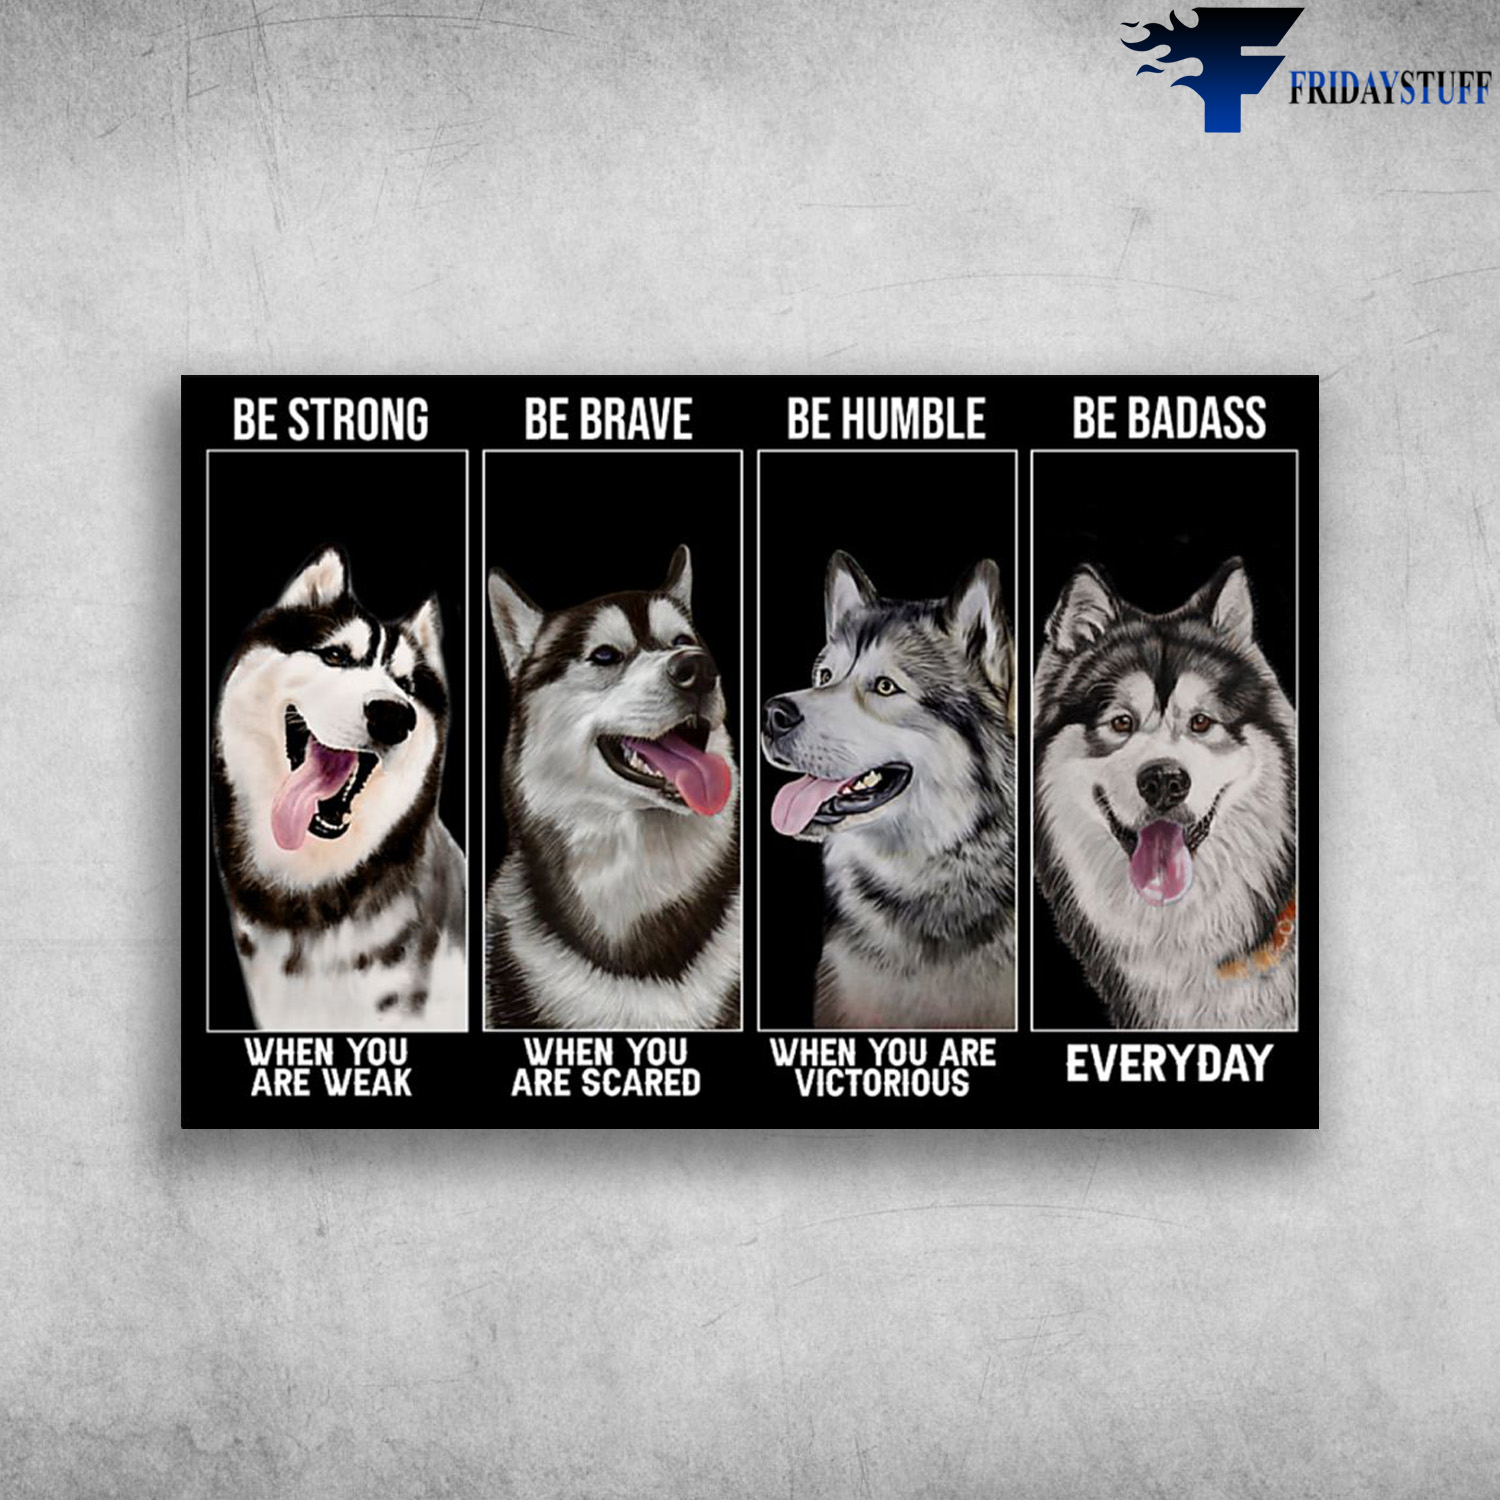 Alaskan Malamute - Be Strong When You Are Weak, Be Brave When You Are Scared, Be Humble When You Are Victorious, Be Badass Everyday